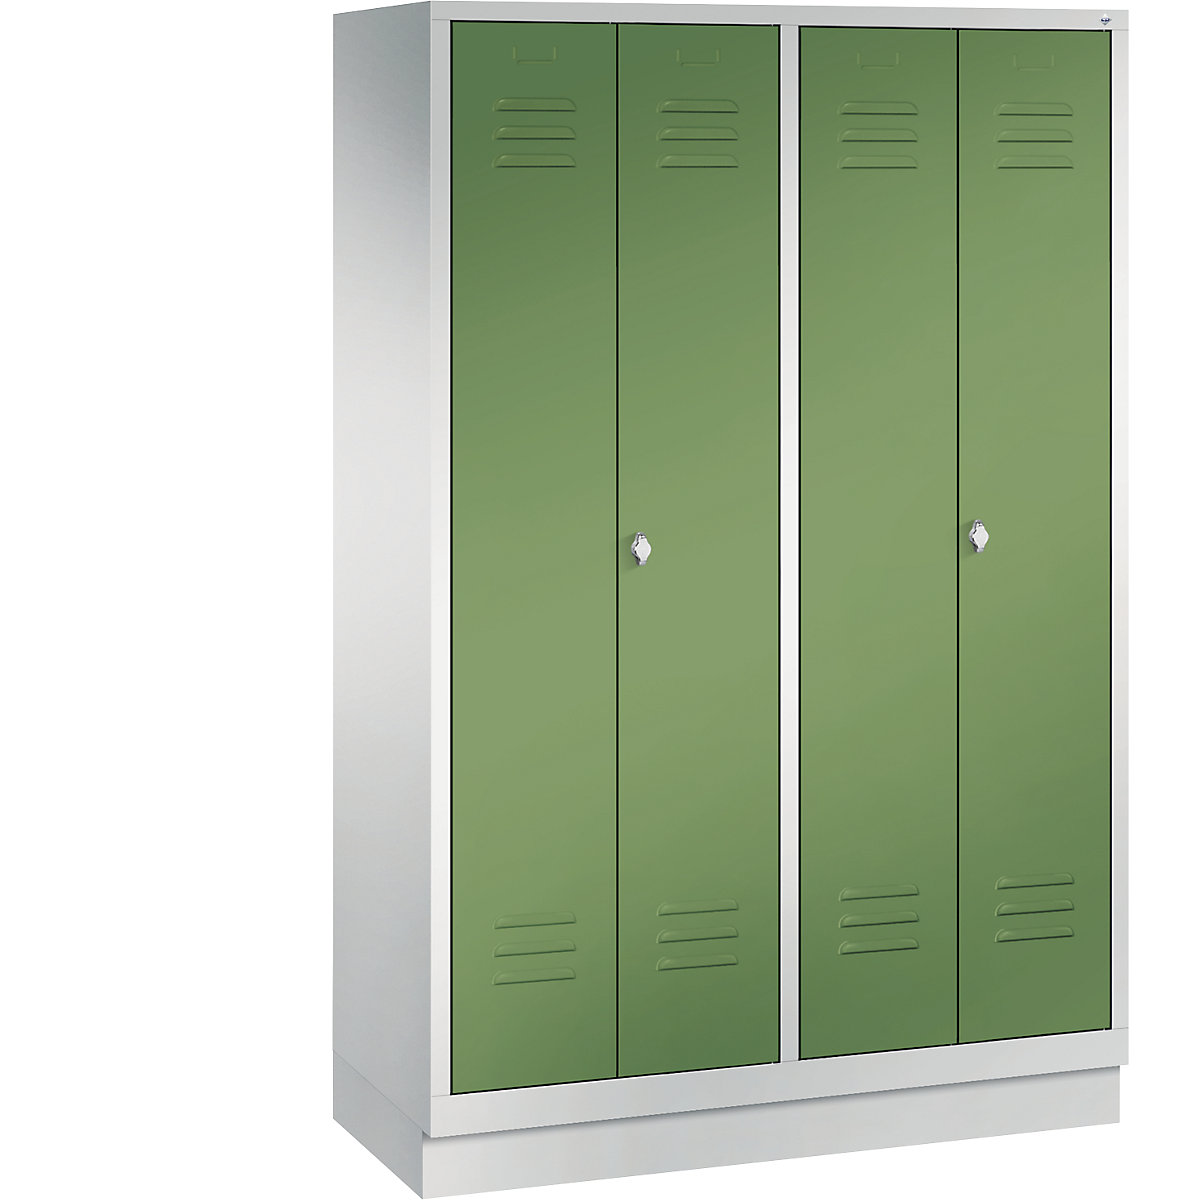 CLASSIC cloakroom locker with plinth, doors close in the middle – C+P, 4 compartments, compartment width 300 mm, light grey / reseda green-14